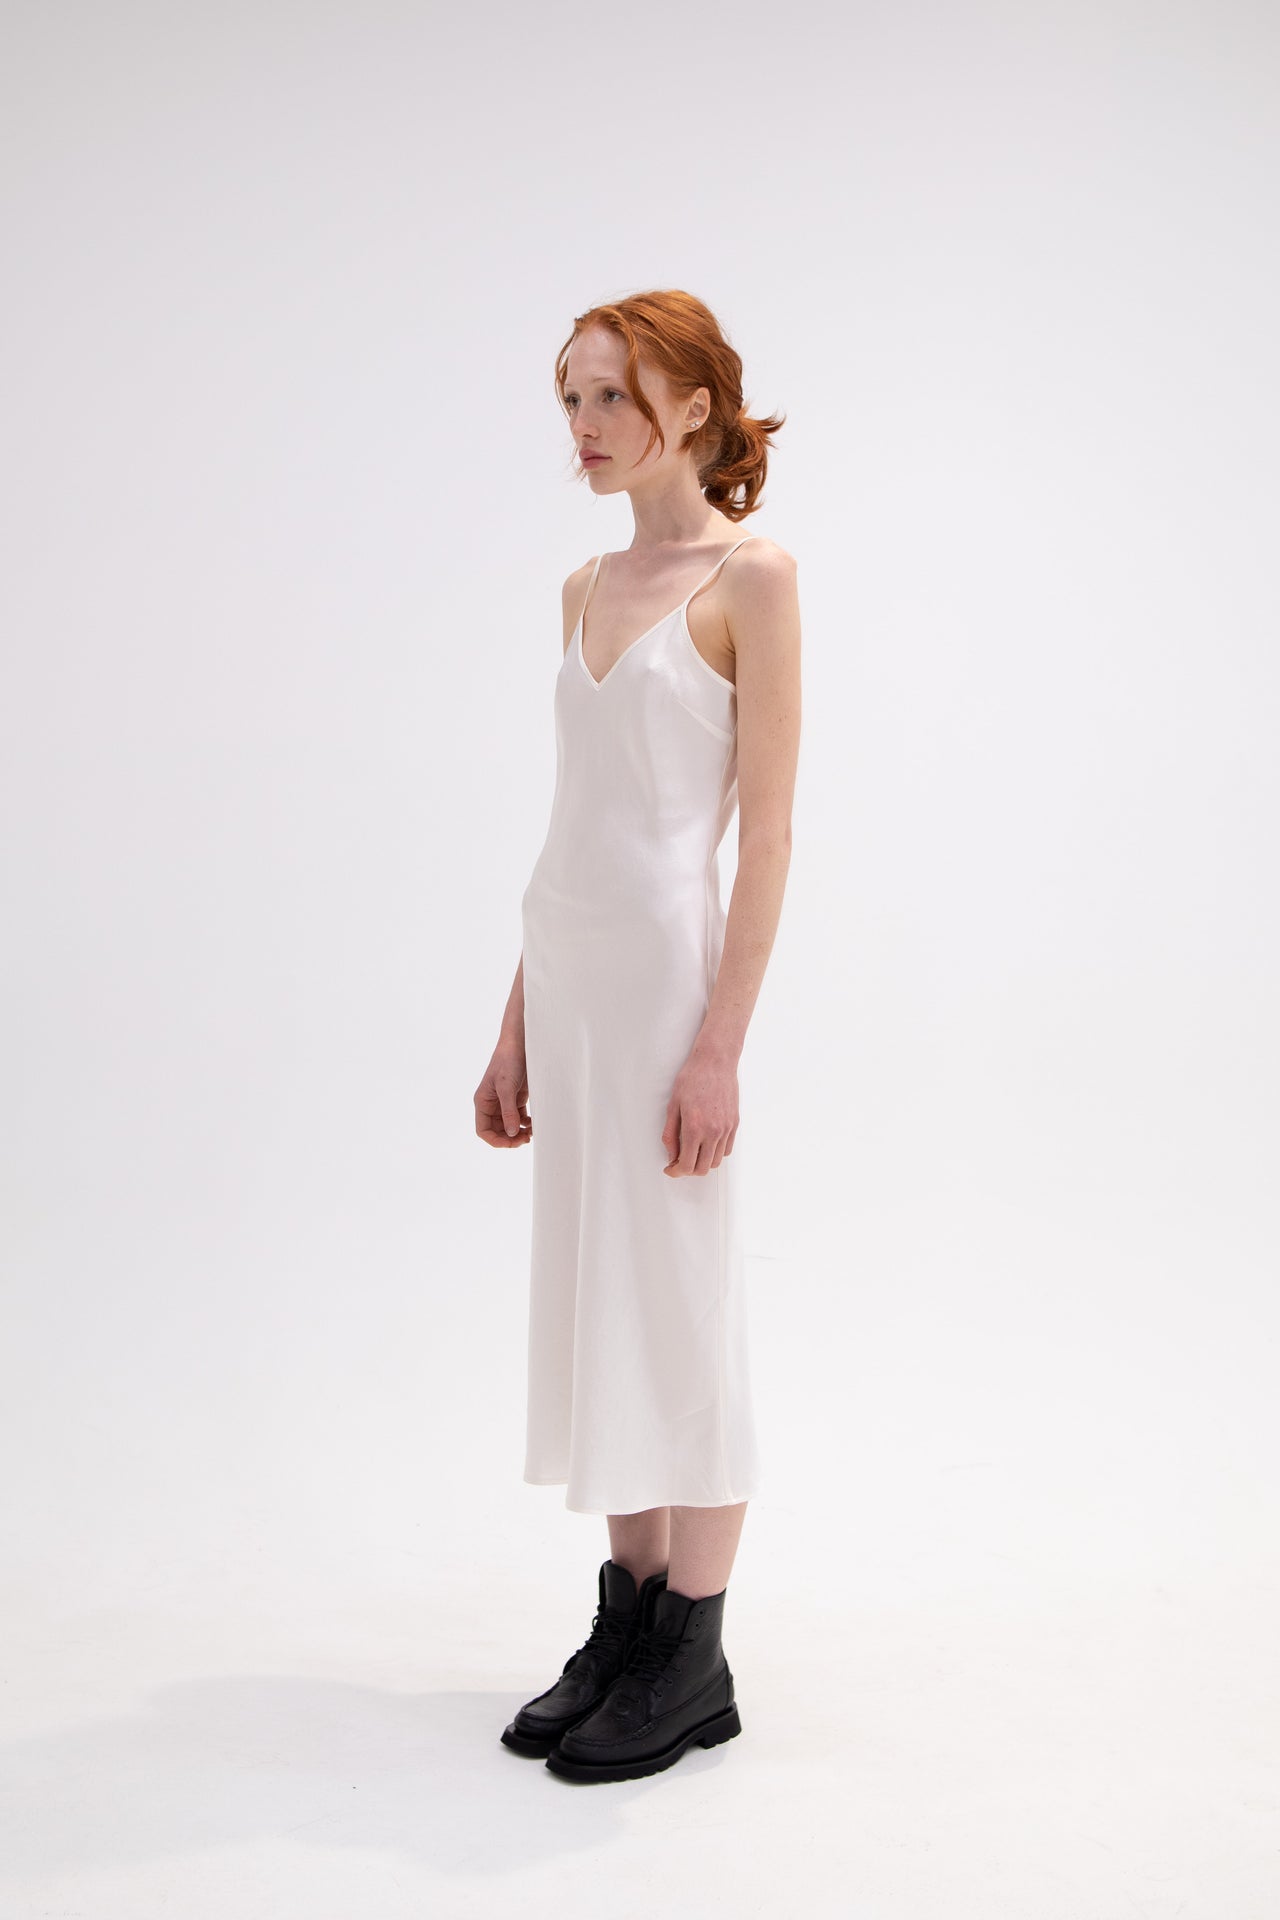 Silky Nina slip for laying underneath wrap, classic slip dress silhouette or wear in its own